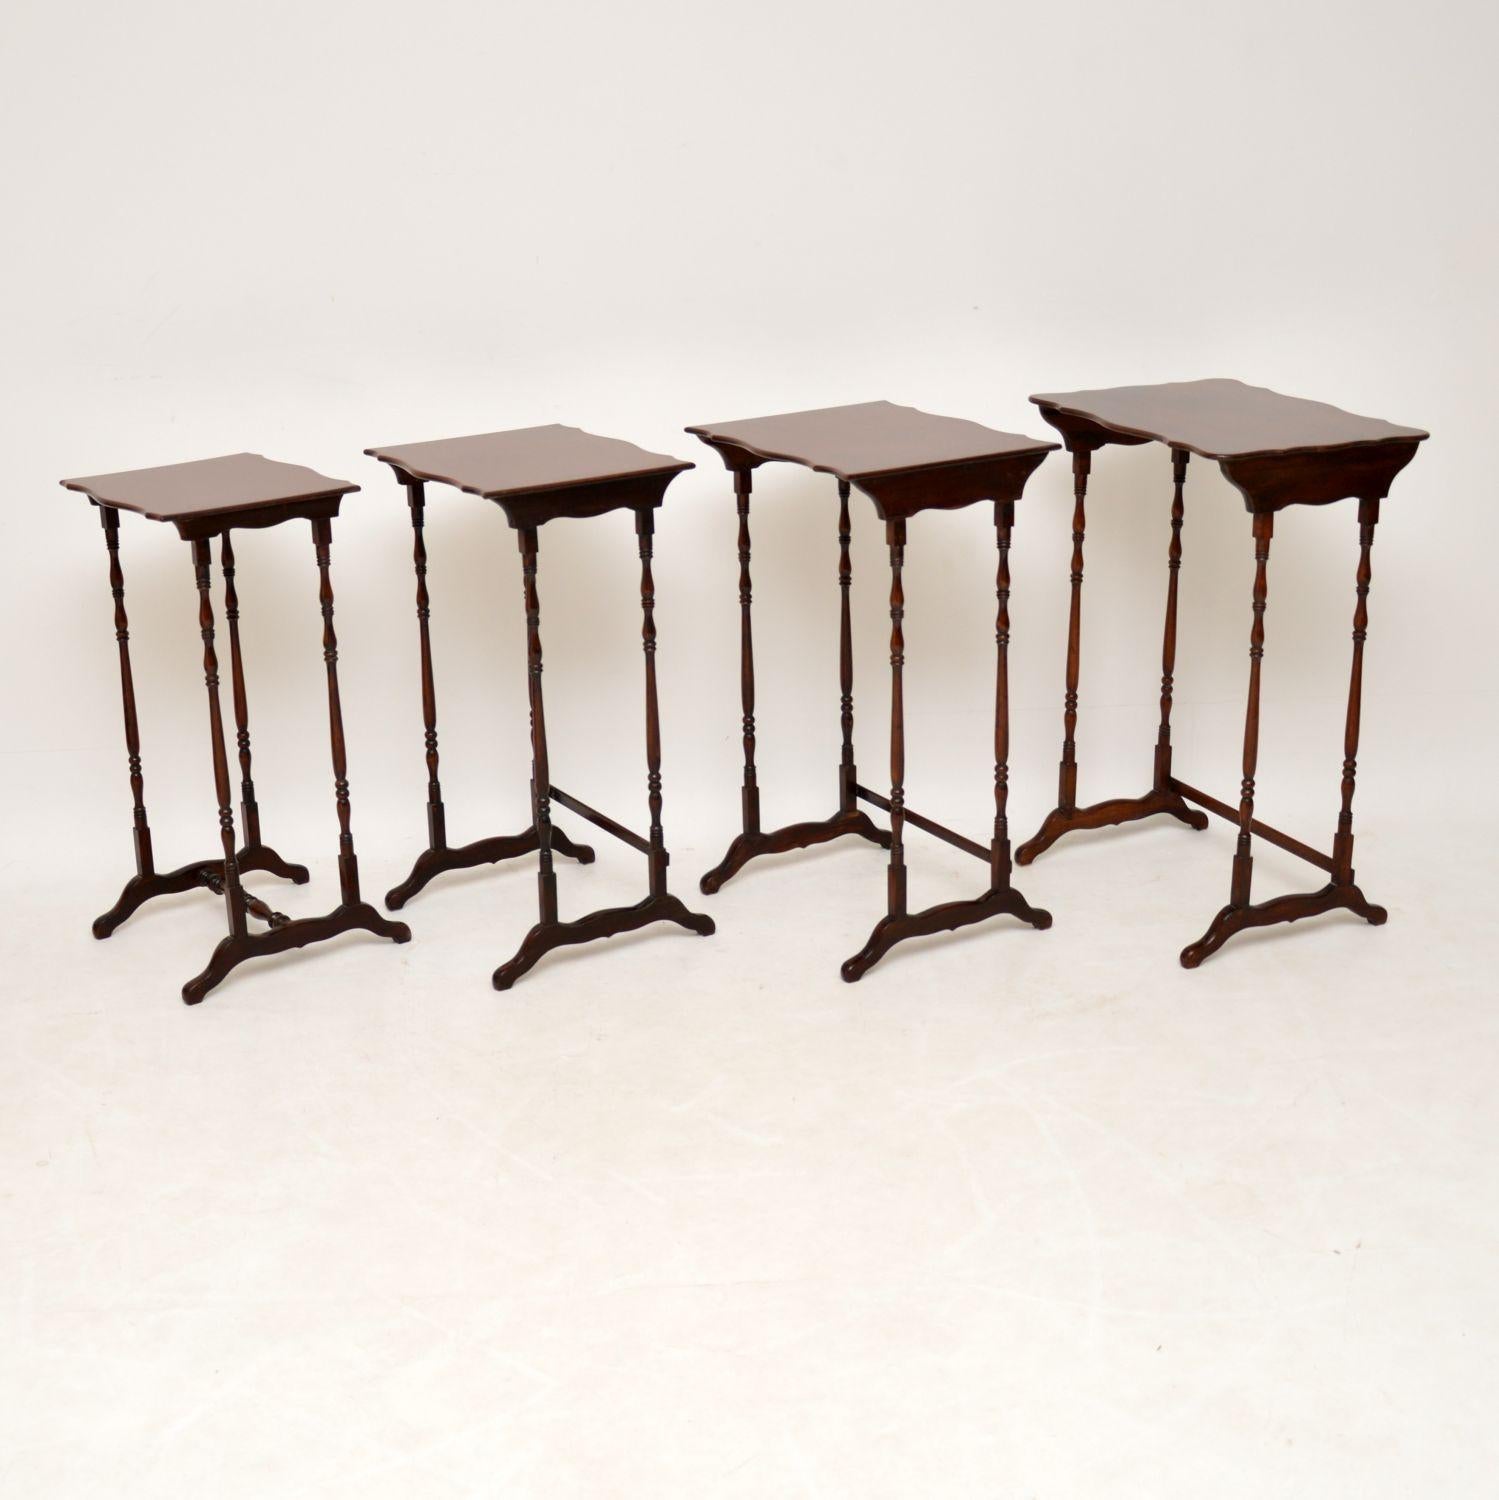 Mid-19th Century Antique Mahogany Nest of Four Tables